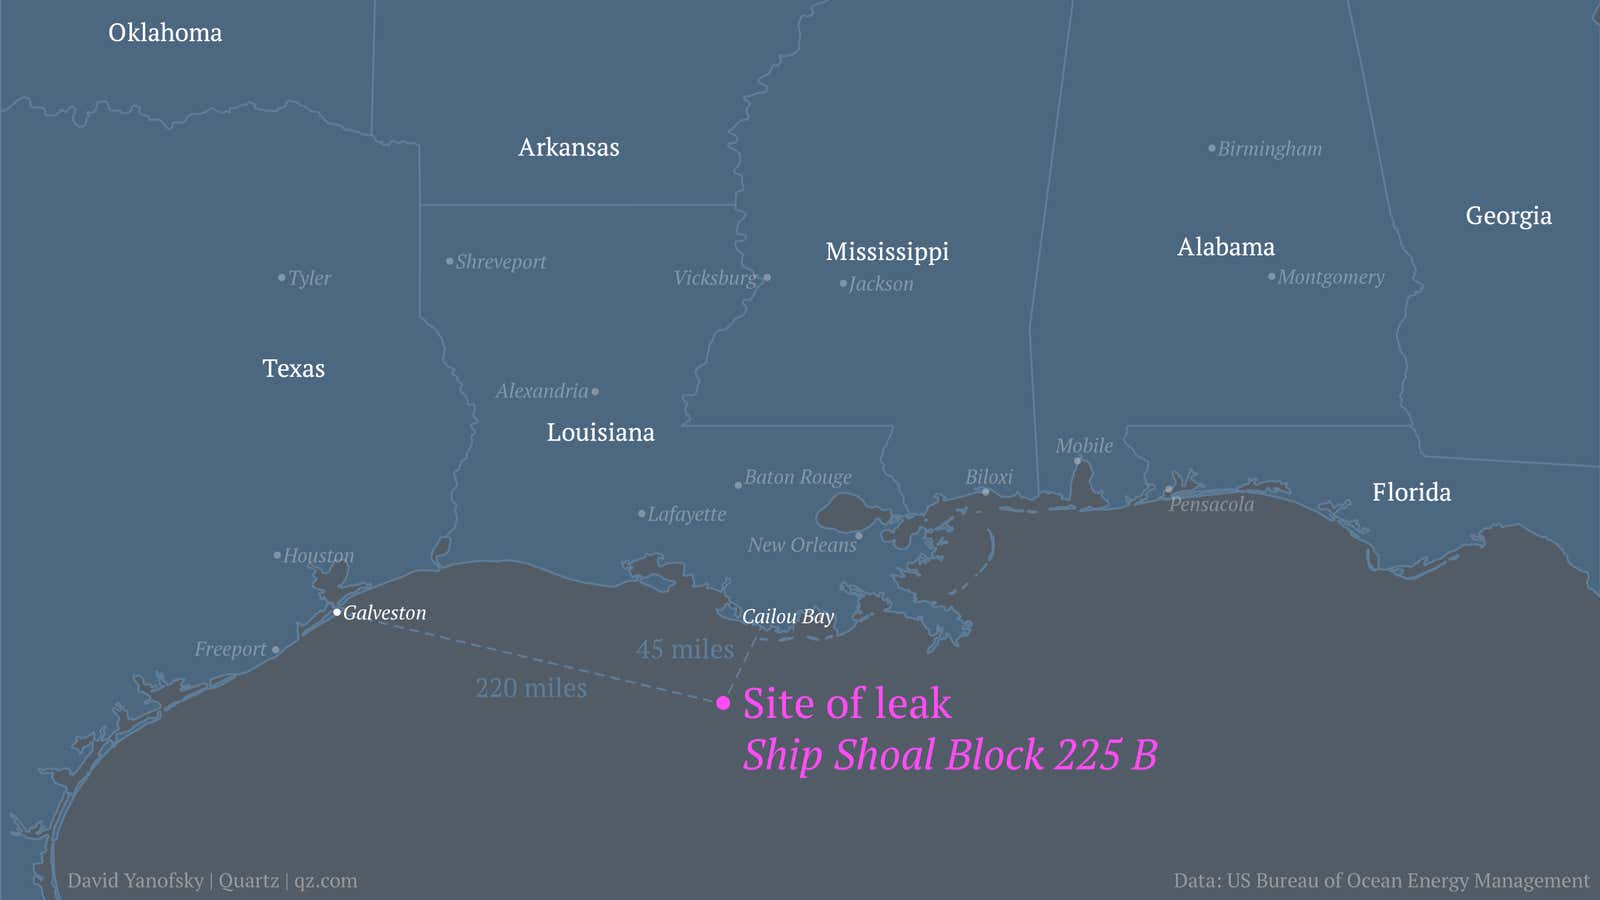 A well in the Gulf of Mexico is leaking oil due to a “loss of control.” Here’s what that means